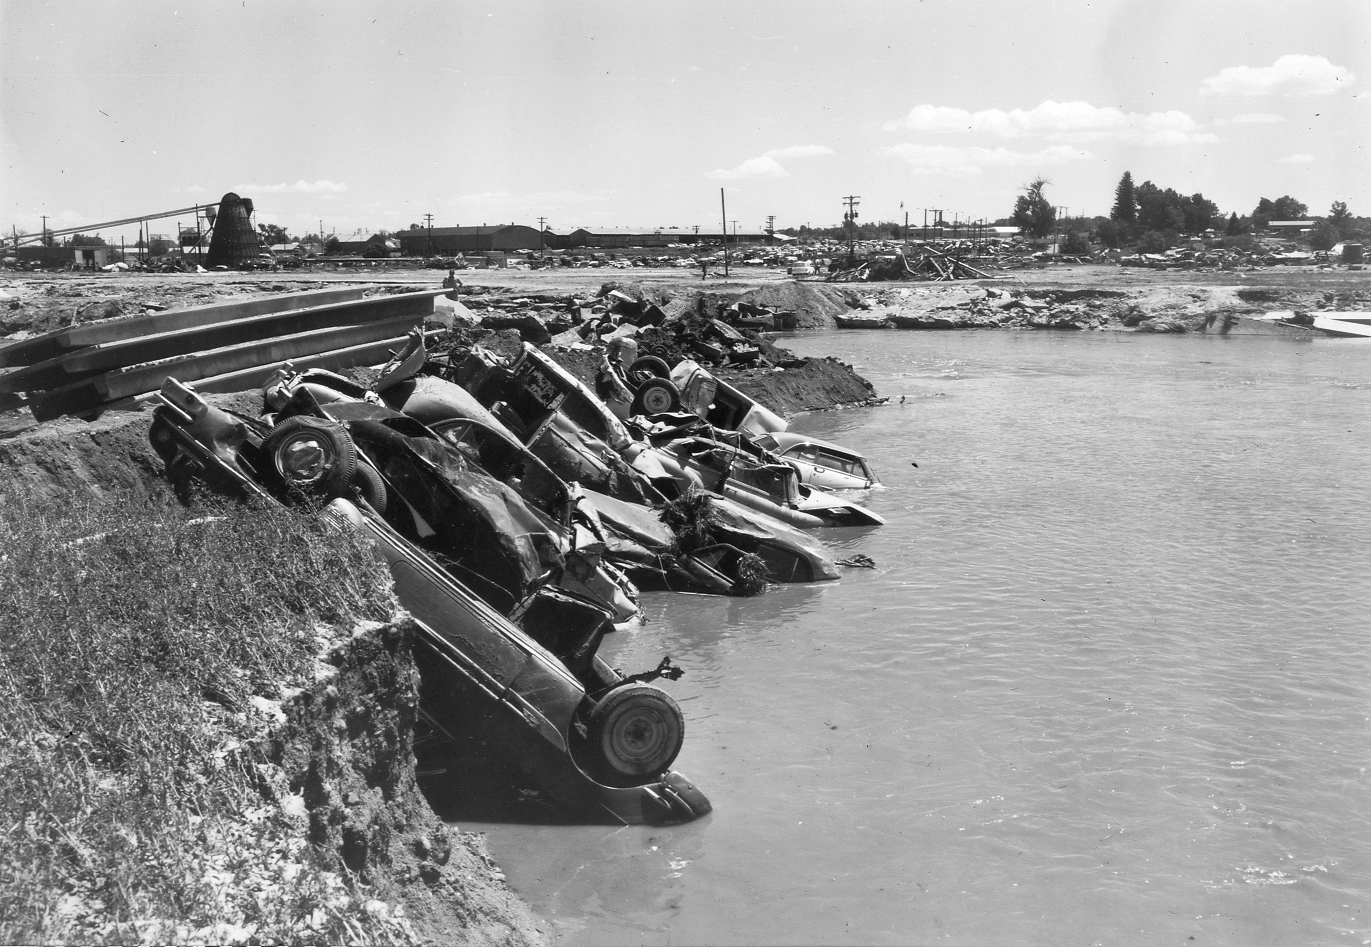 South Platte River Flood – June 16-17, 1965 Looking about due east – showing upstream of fill constructed to protect Conduits #19 &amp; 29. Original ground is in lower left corner. Taken by Hornback 6/25/65.